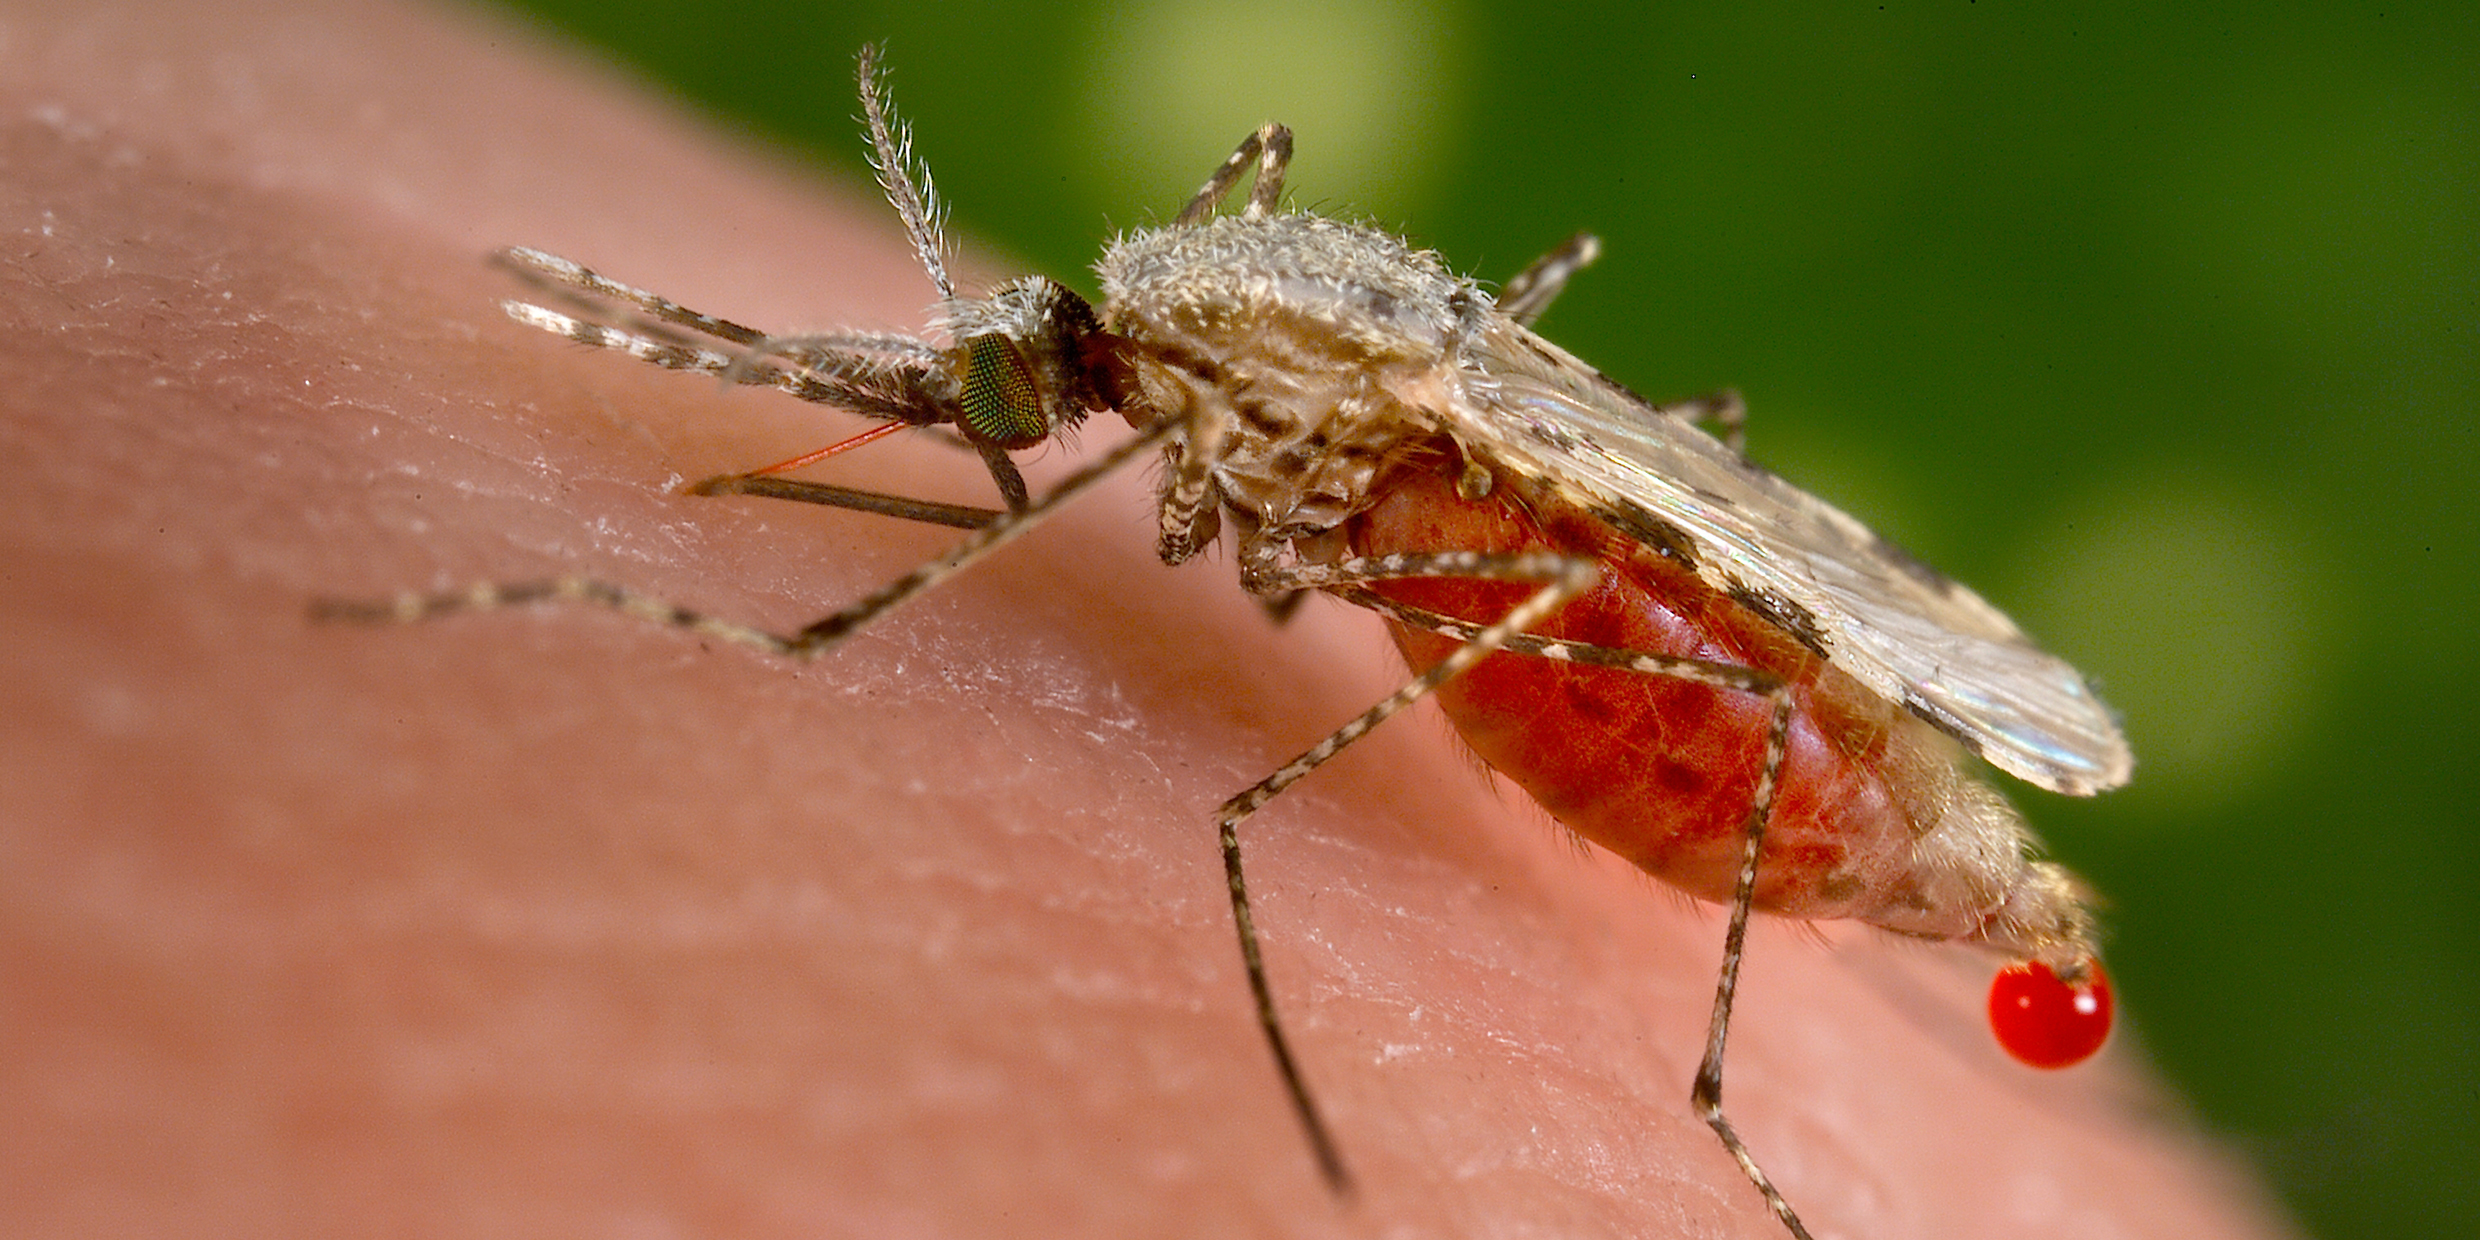 Close-up image of a mosquito feeding on human blood